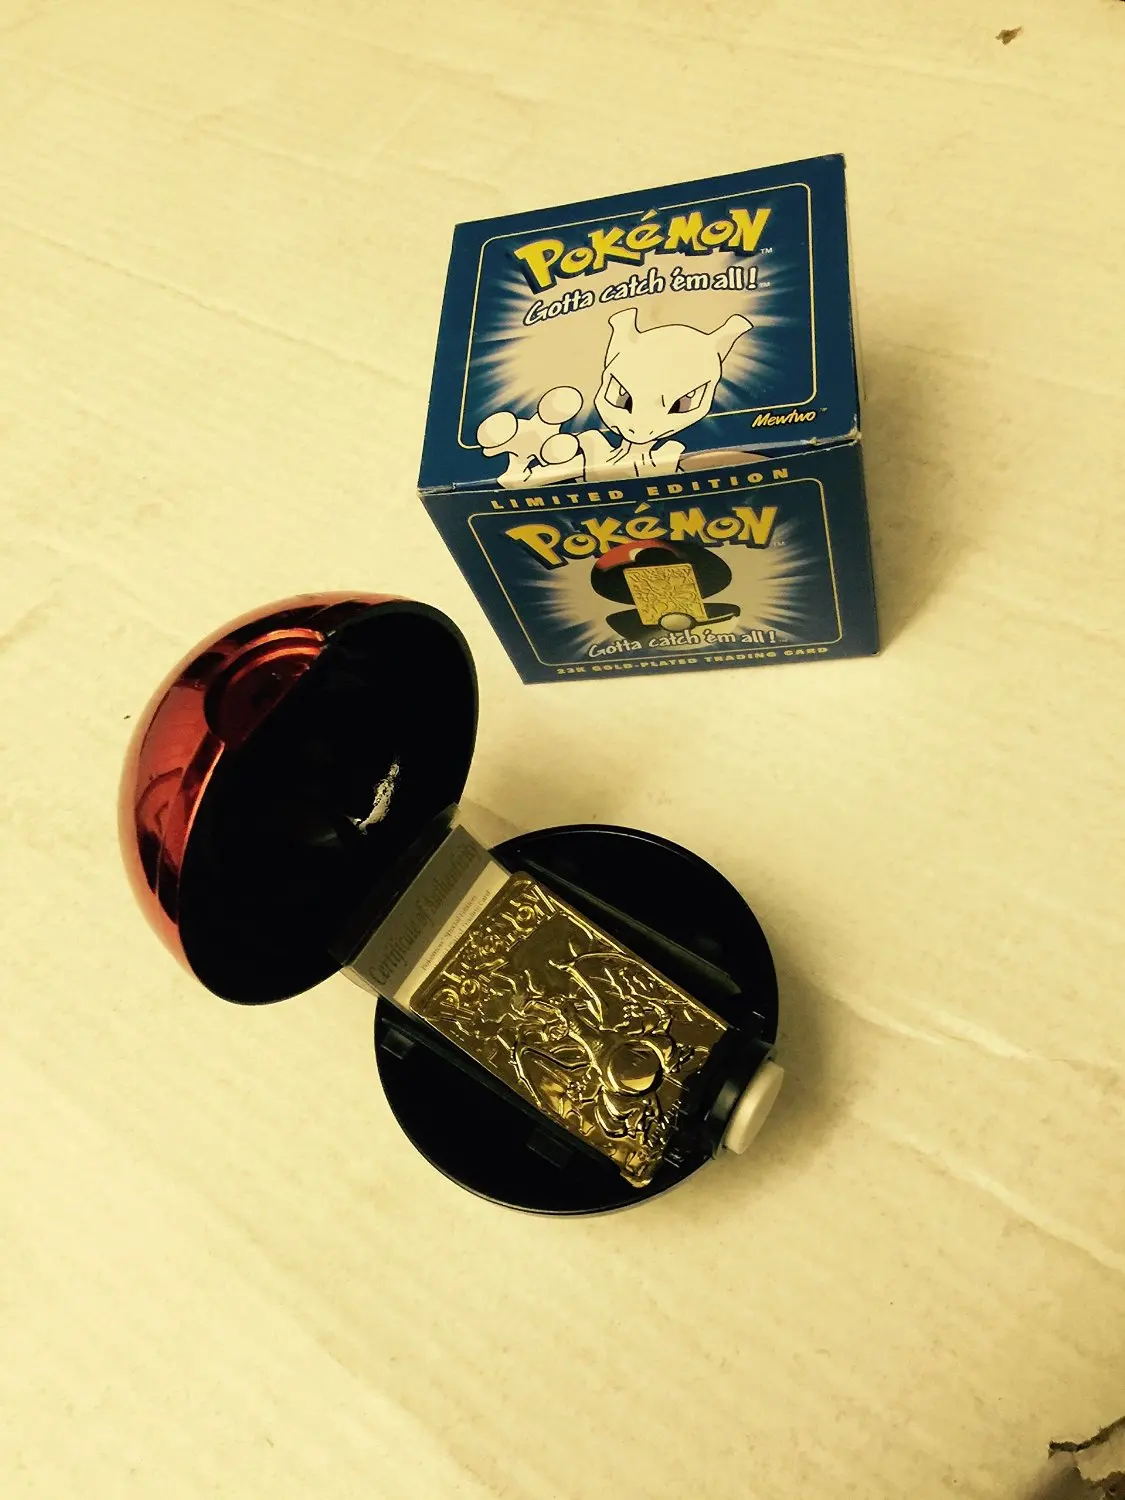 23k gold plated pokemon cards worth